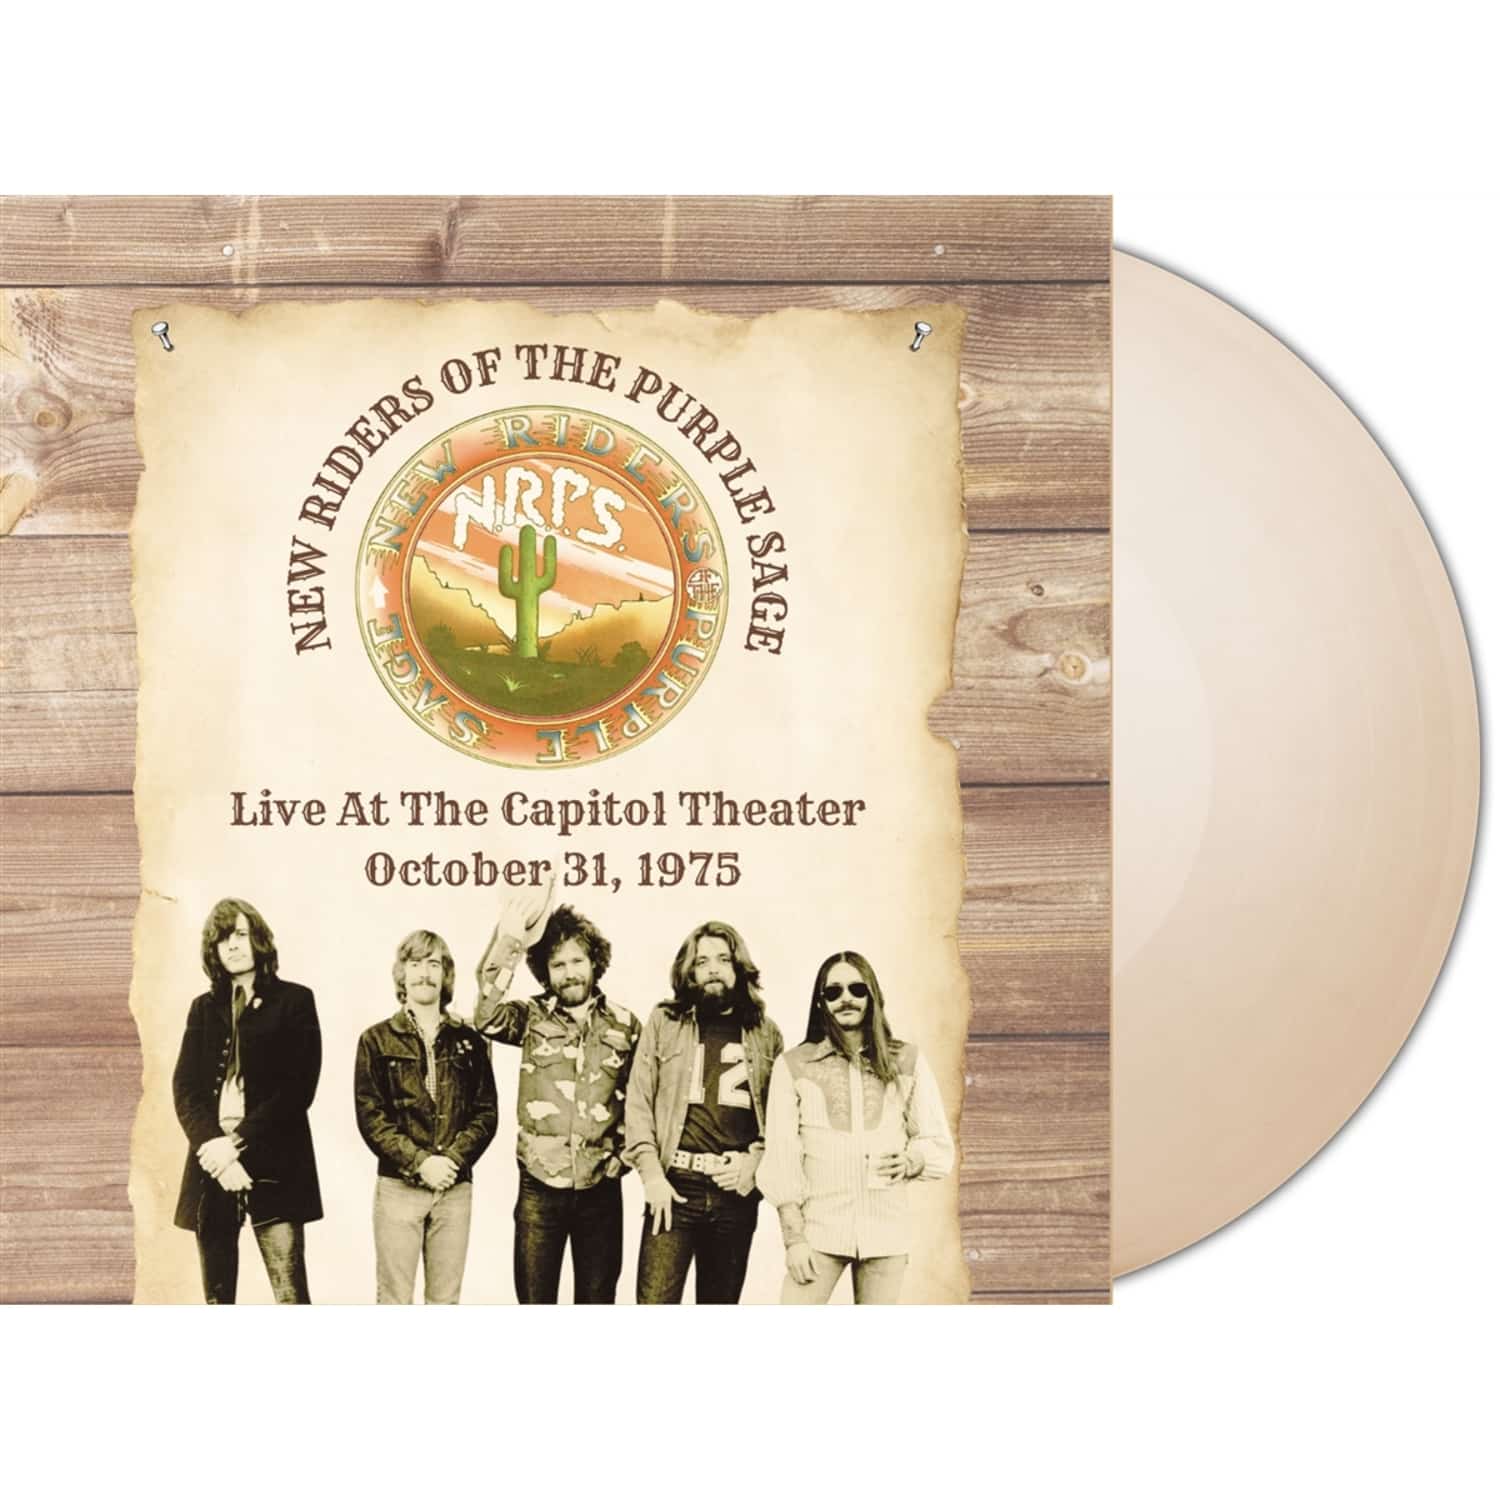 New Riders Of The Purple Sage - LIVE AT THE CAPITOL THEATER 